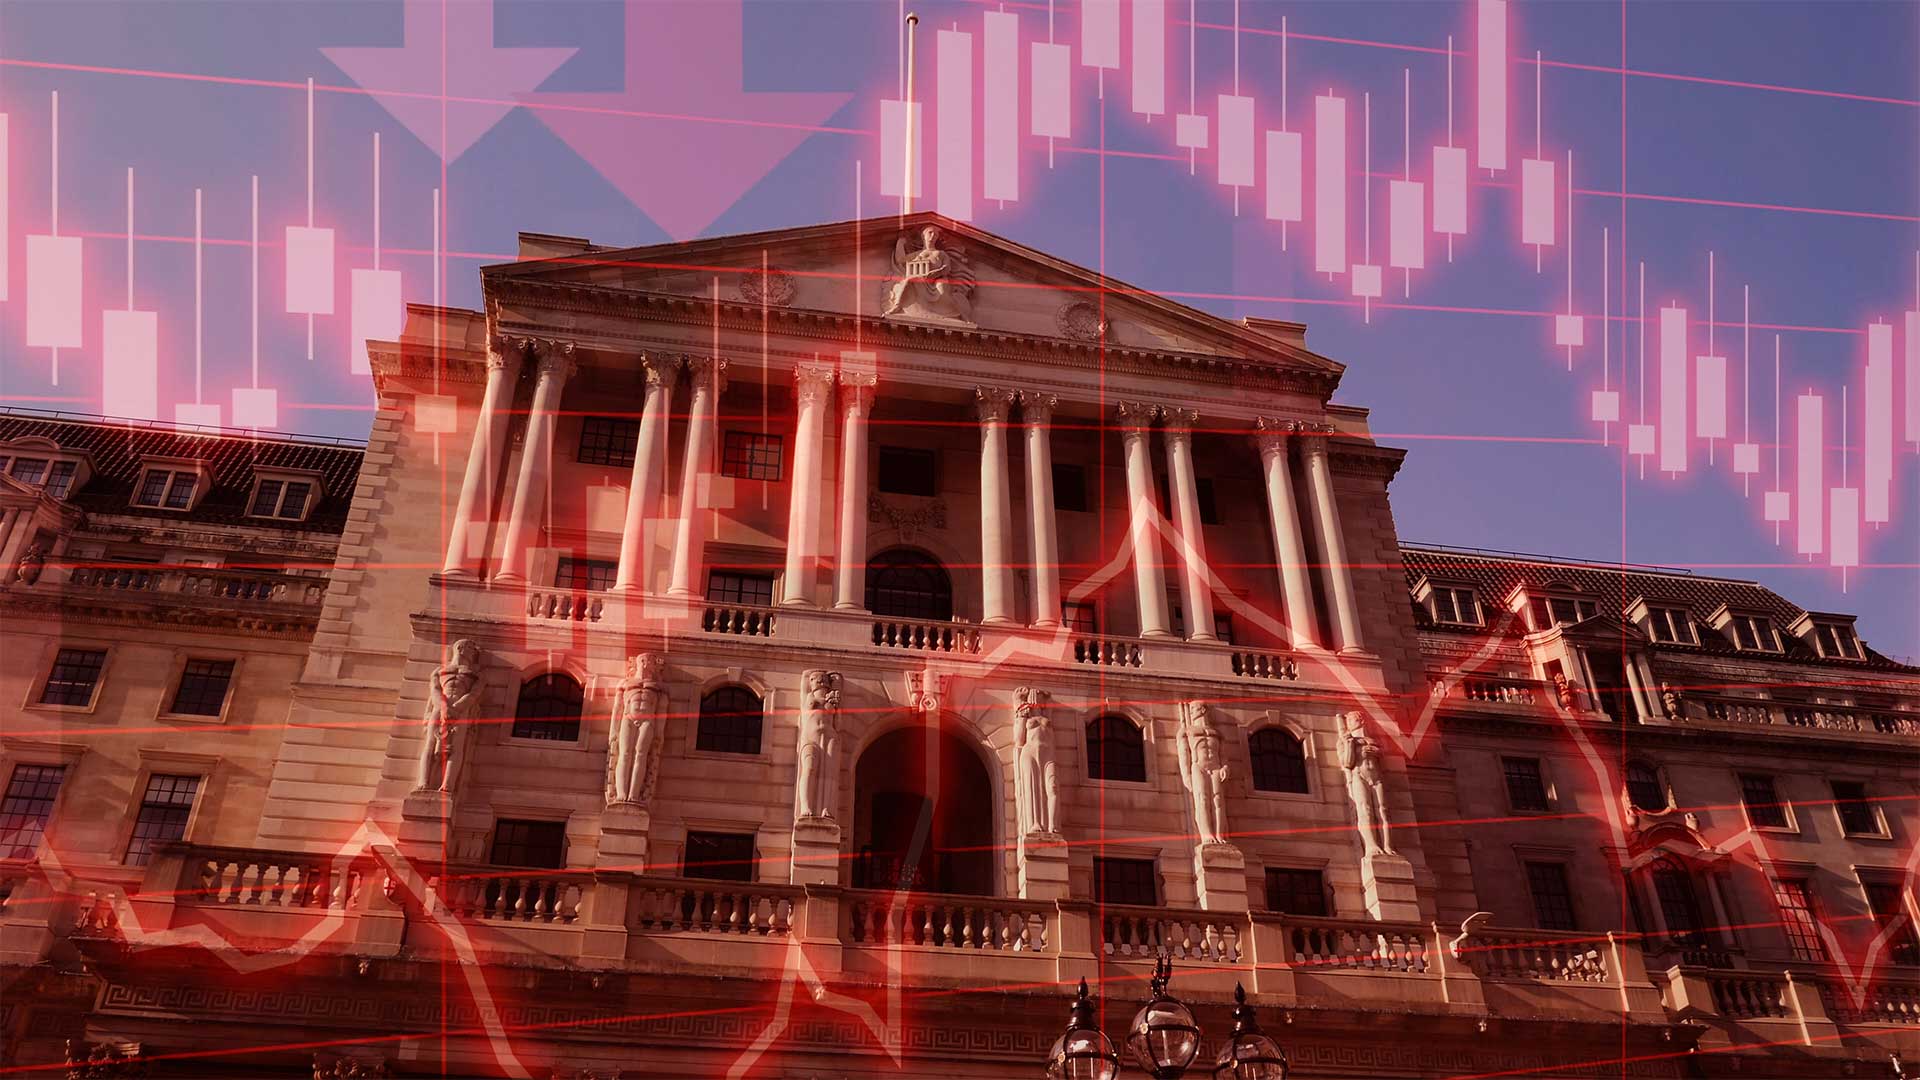 Bank with graphics showing red arrows pointing down